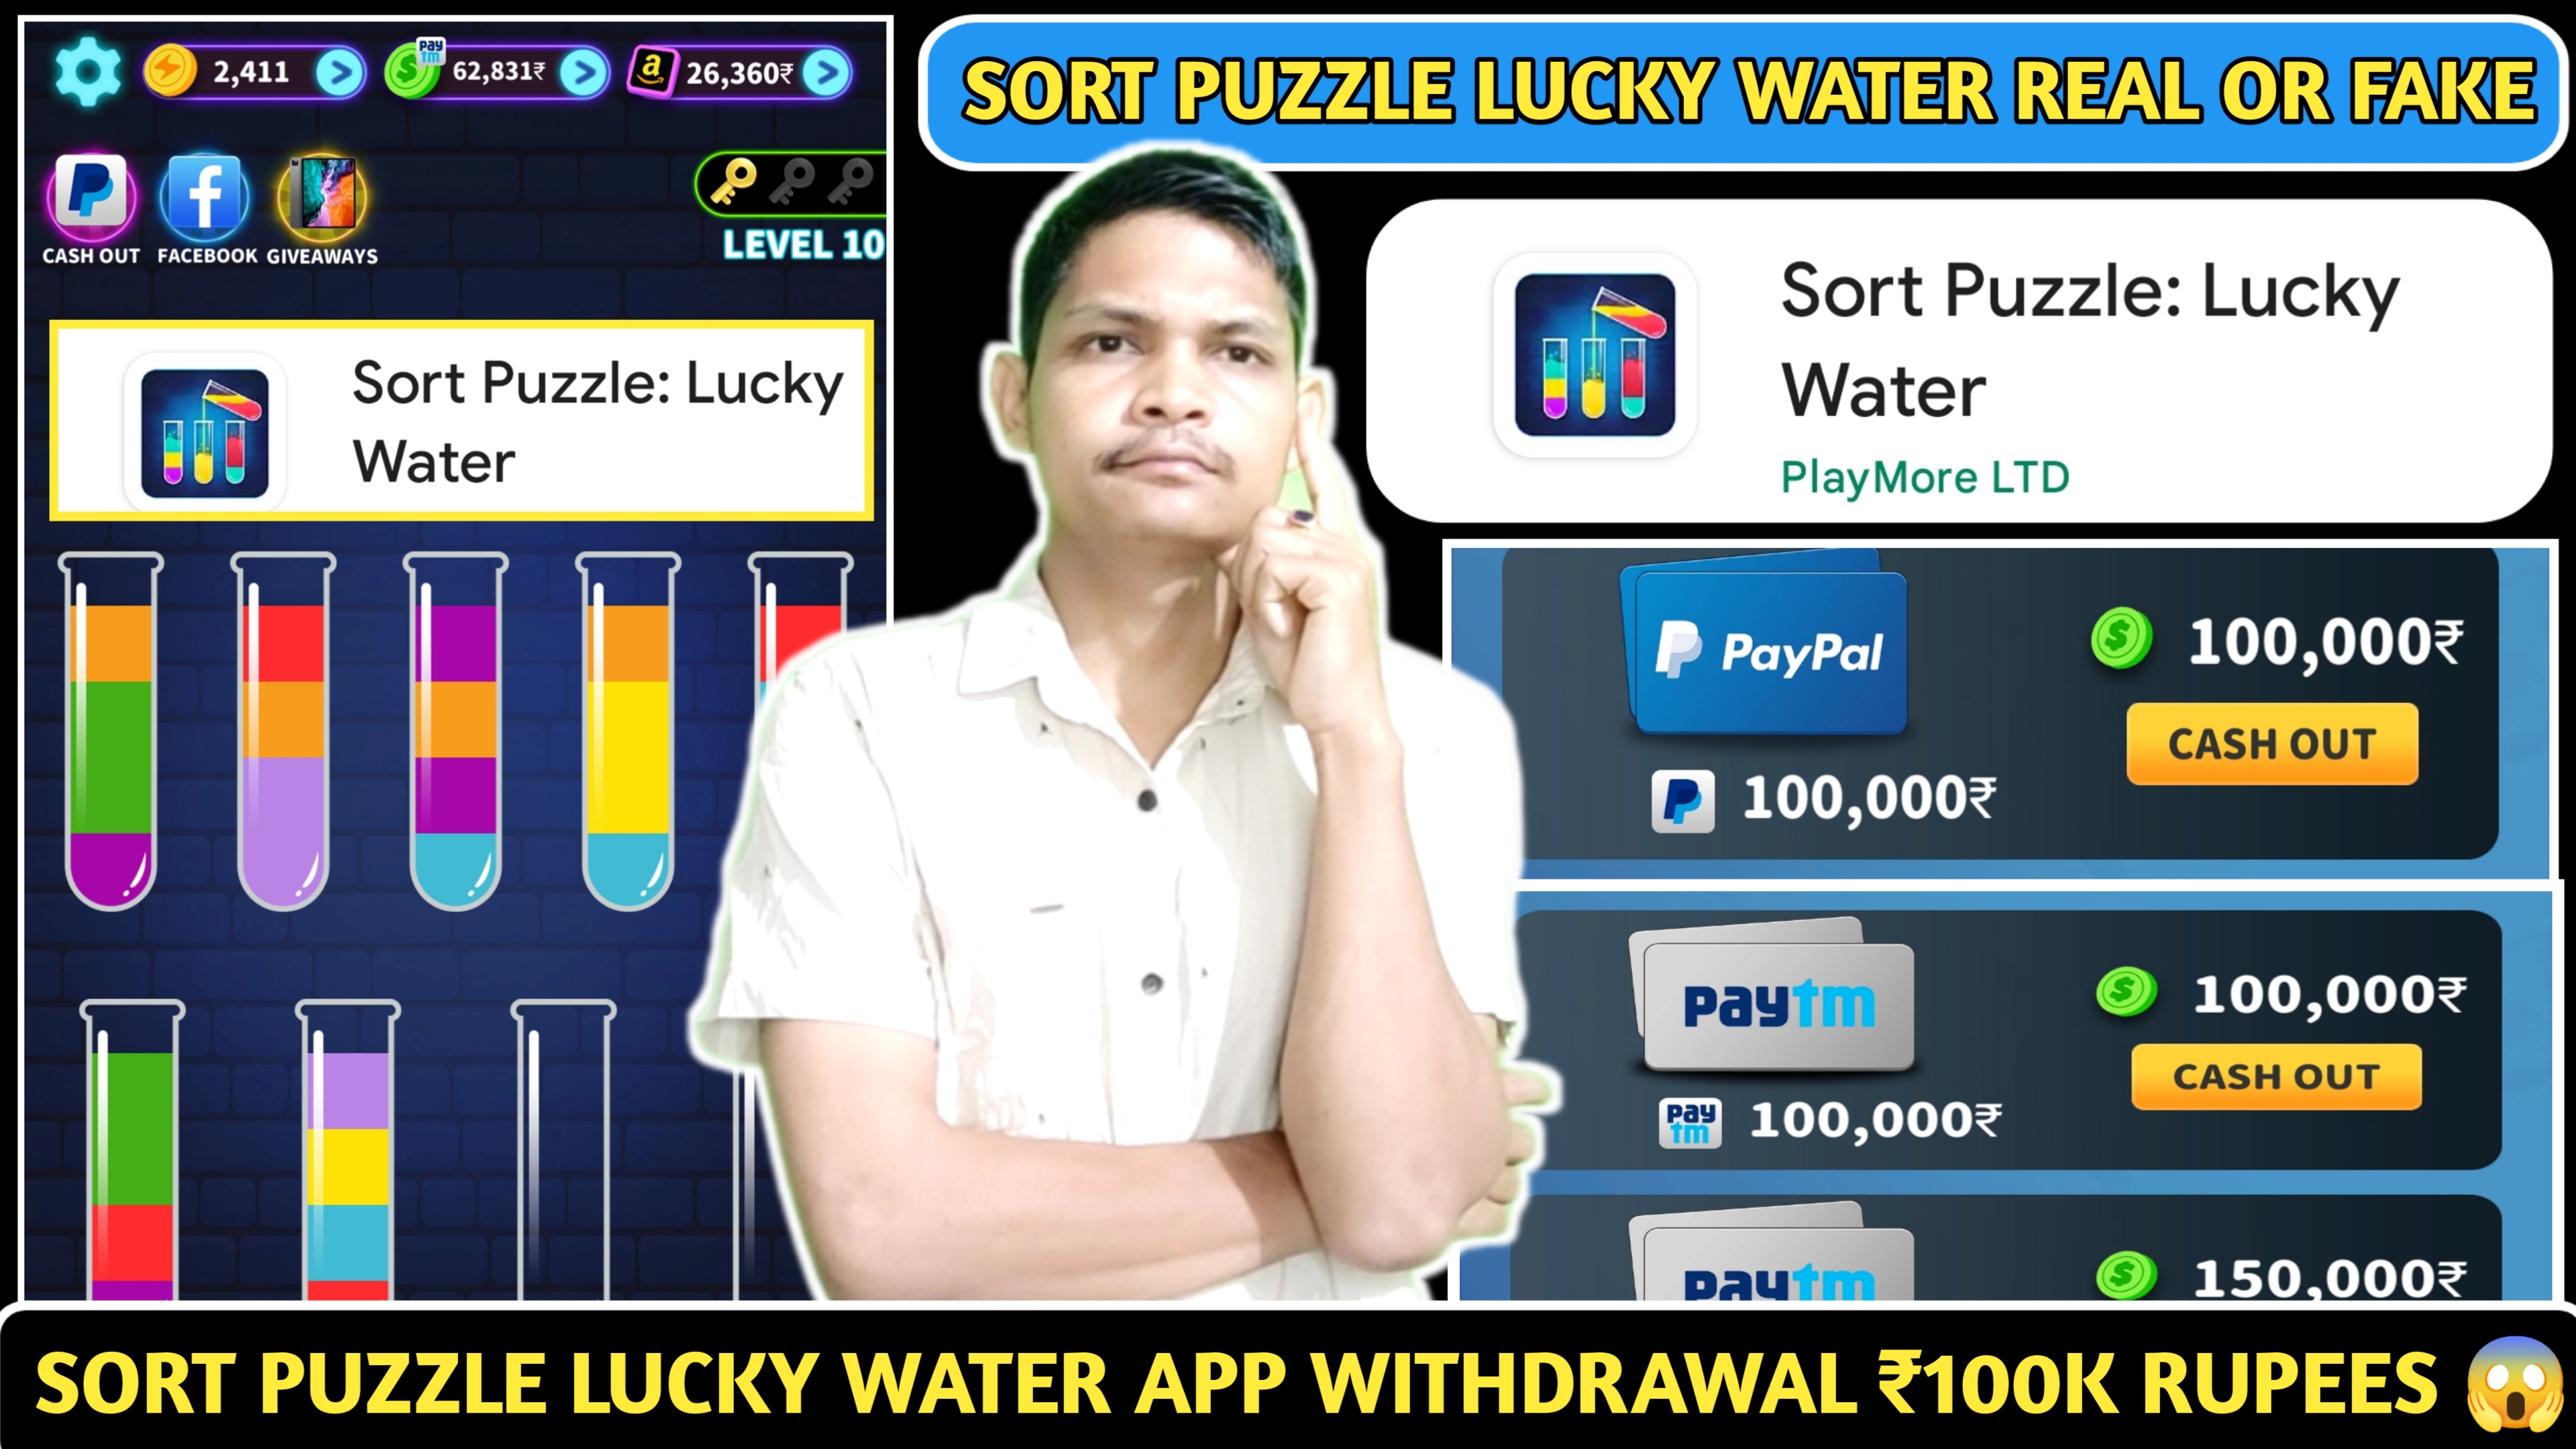 Sort Puzzle Lucky Water